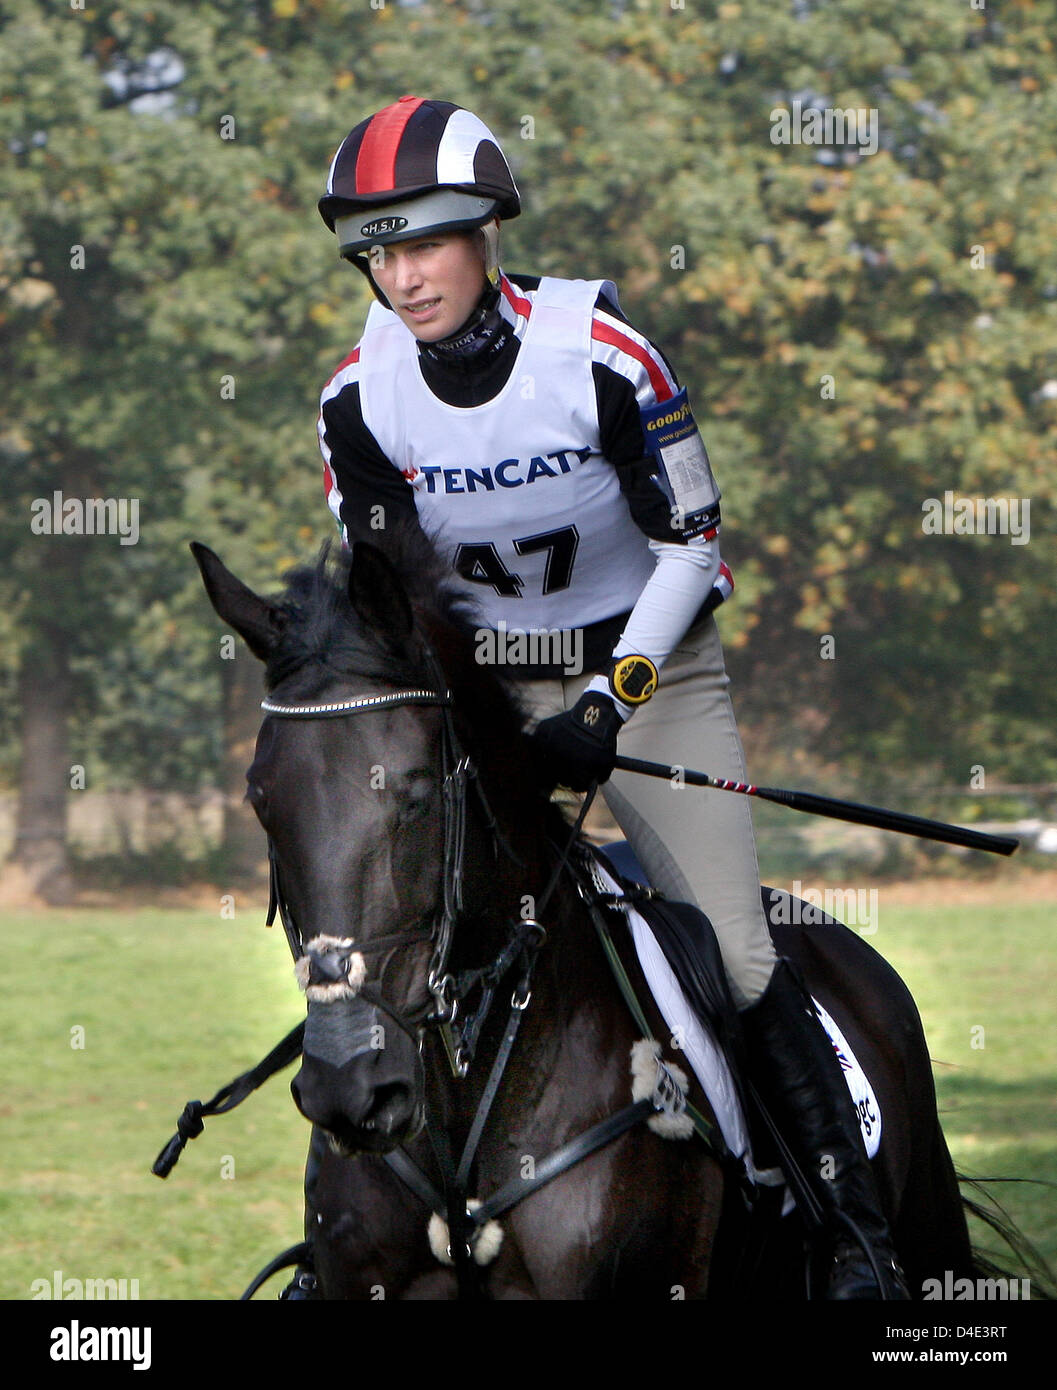 British Zara Philips, daughter of the Princess Royal, rides her horse  Tallyho Sambucca during the Military Riding Tournament in Boekelo,  Enschede, Netherlands, 11 October 2008. Photo: Patrick van Katwijk Stock  Photo - Alamy